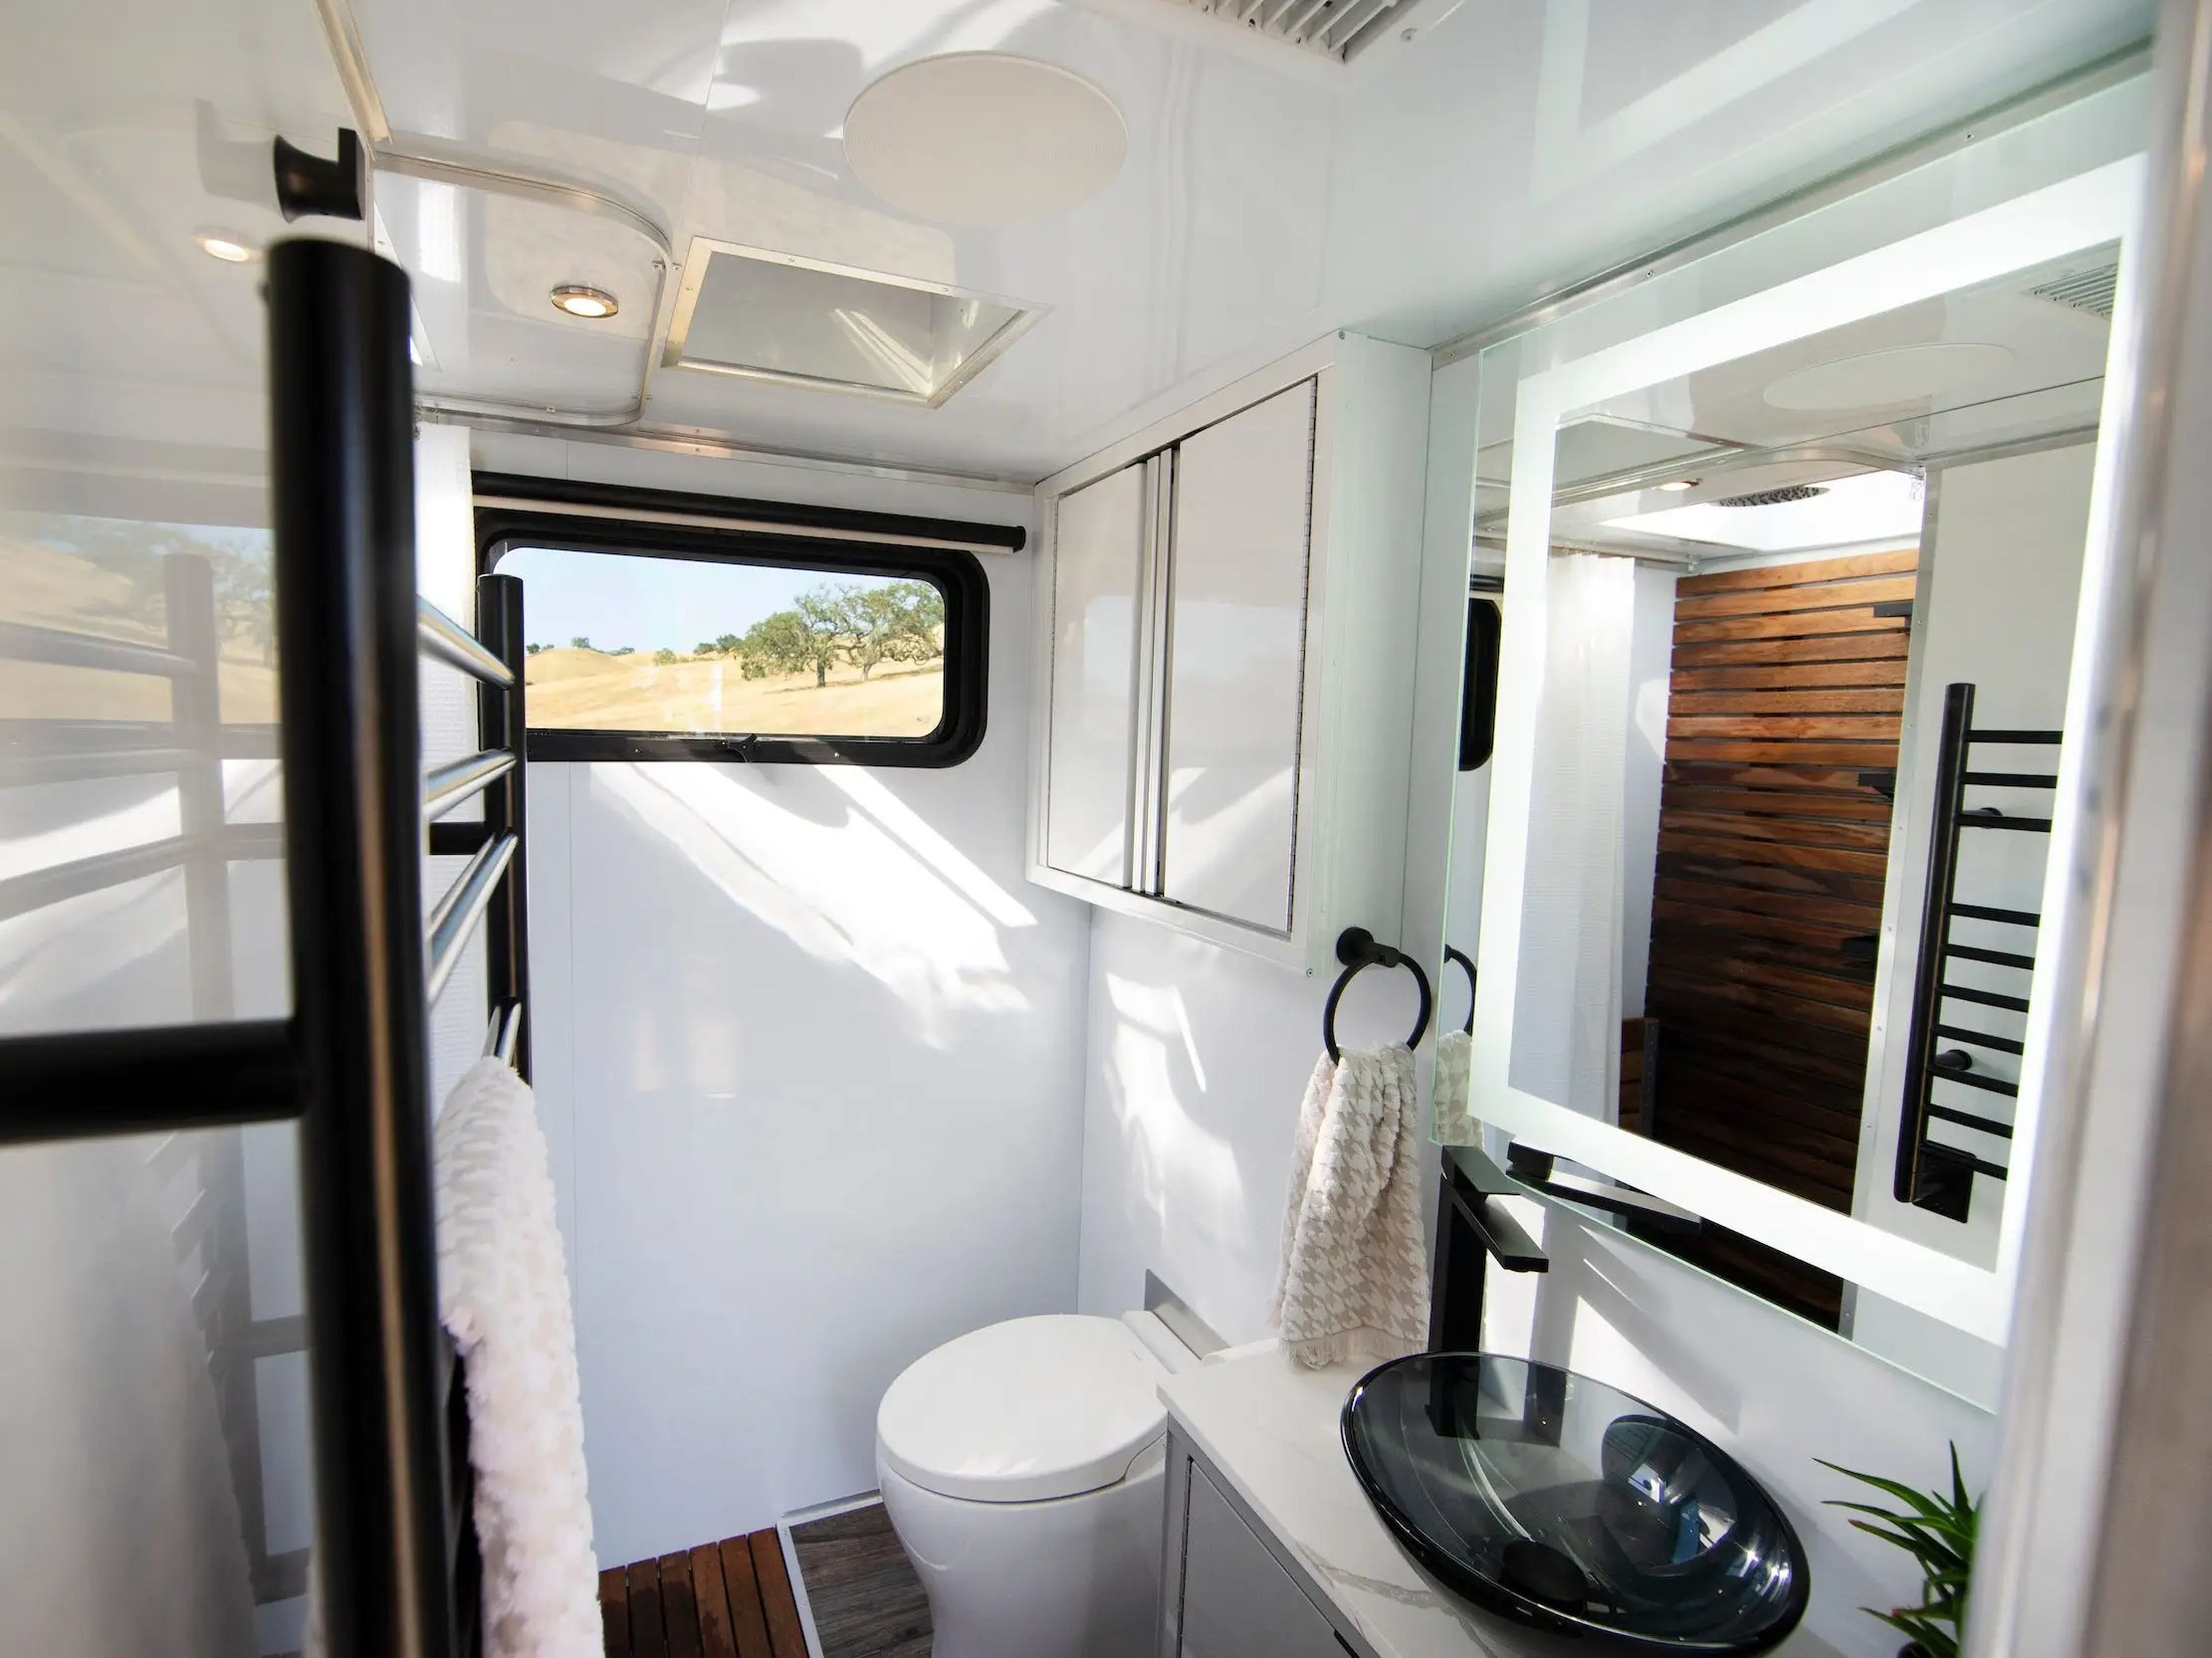 A bathroom with a window, towerl rack, mirror, sink, toilet.